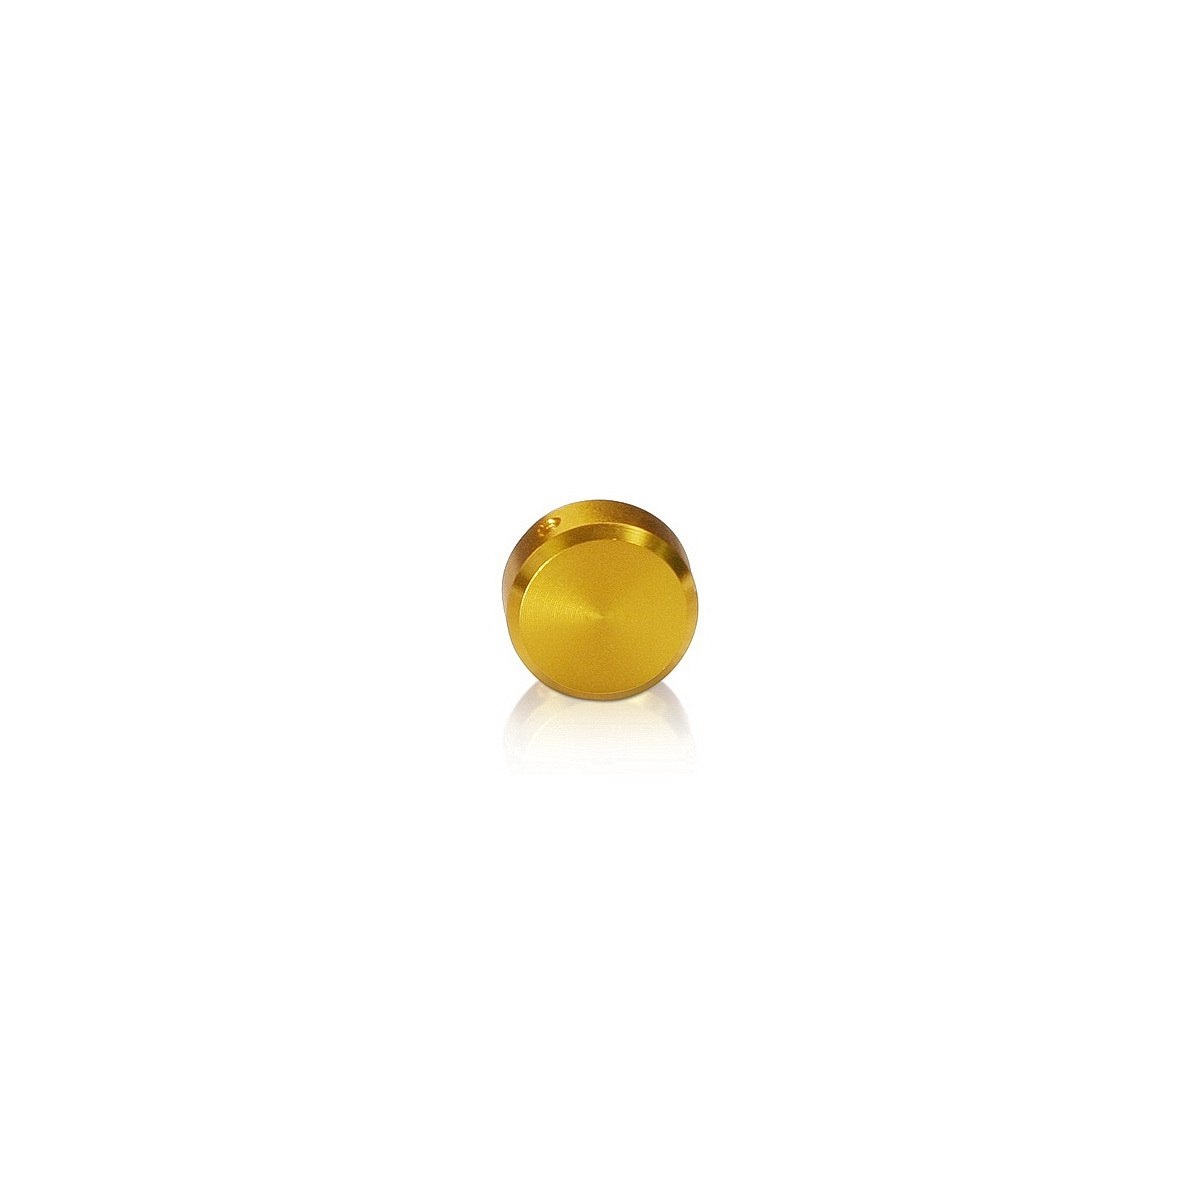 1/4-20 Threaded Locking Caps Diameter: 5/8'', Height: 1/4'', Gold Anodized Aluminum [Required Material Hole Size: 5/16'']